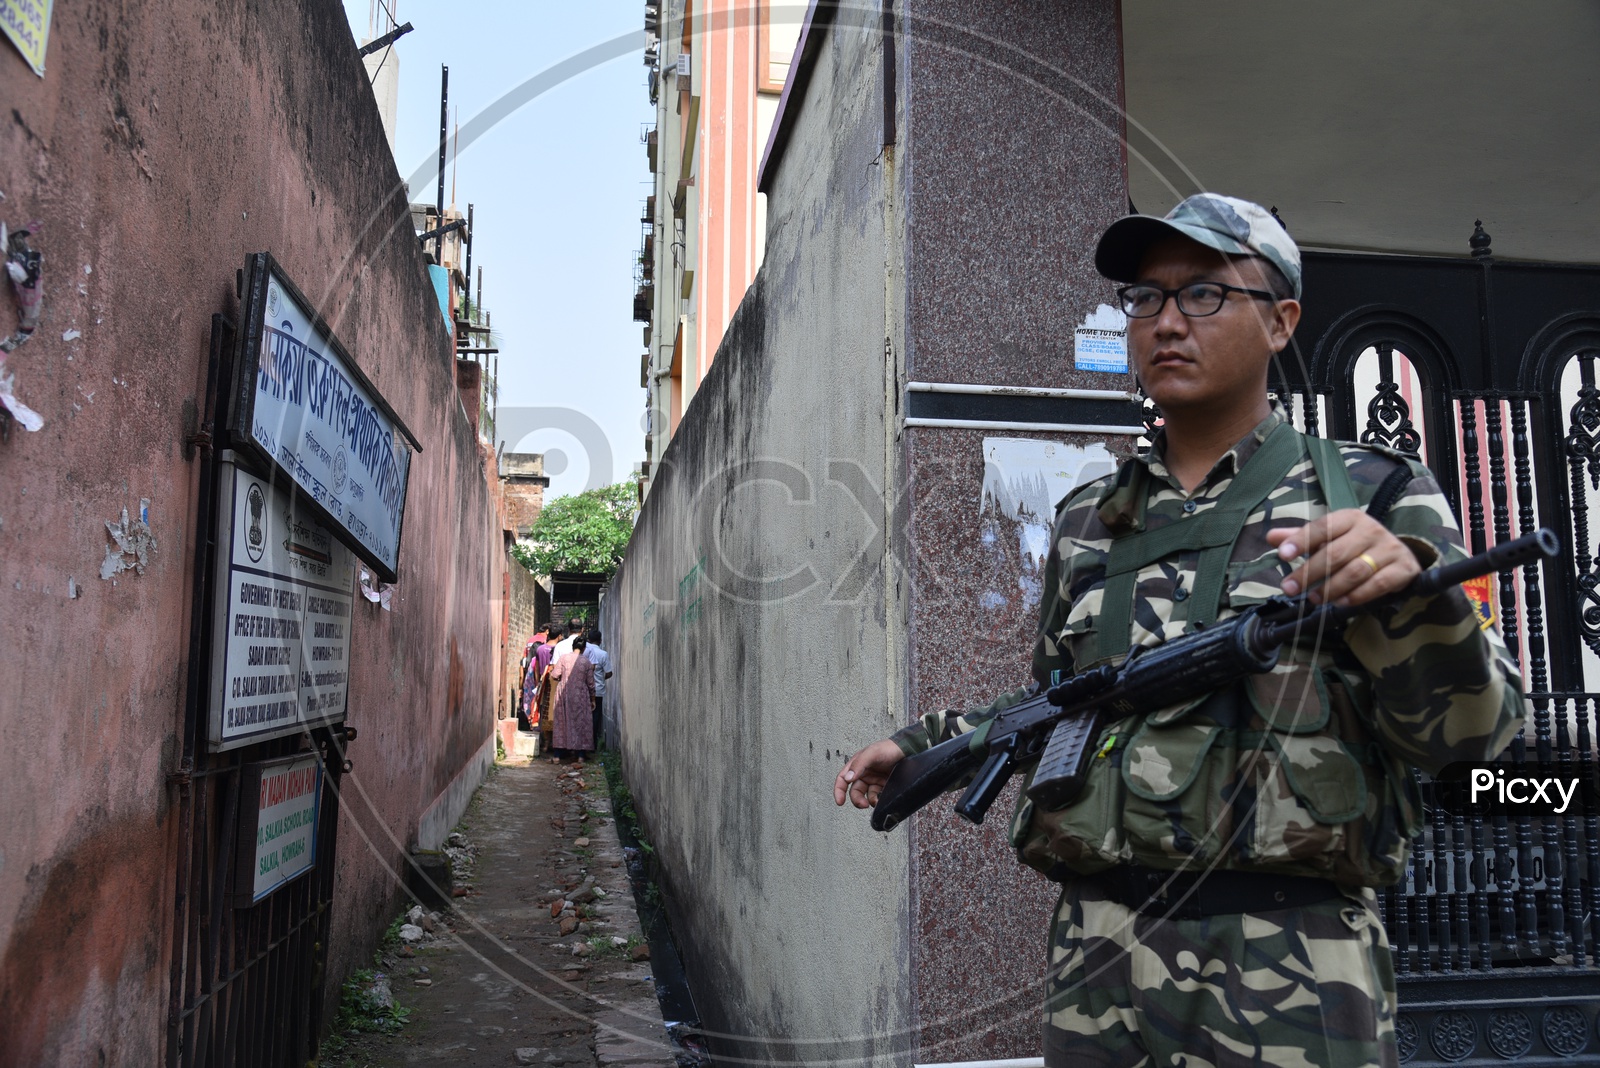 BSF Or Army Personal Security Guard at Polling Booth For Lok Sabha  General Elections 2019 In West Bengal